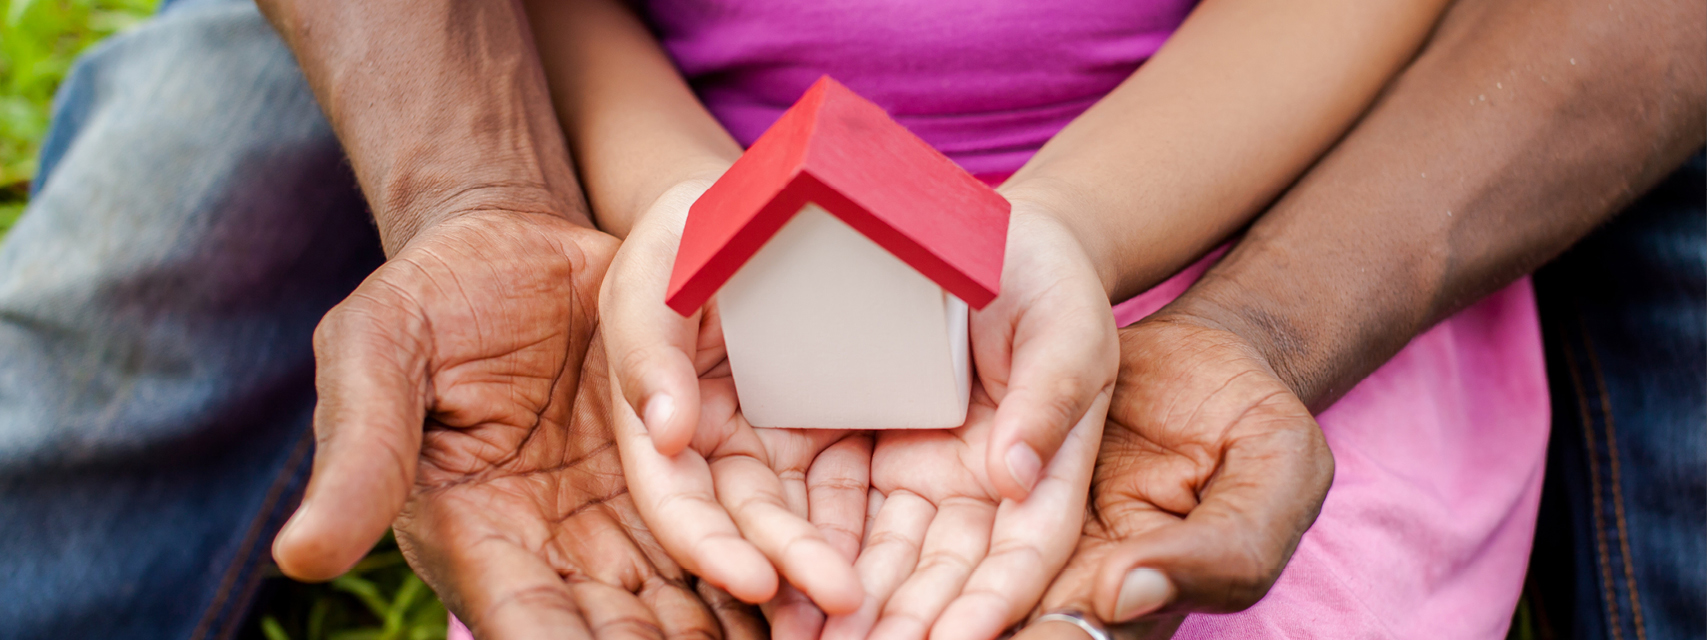 Header banner - photo of hands holding toy house